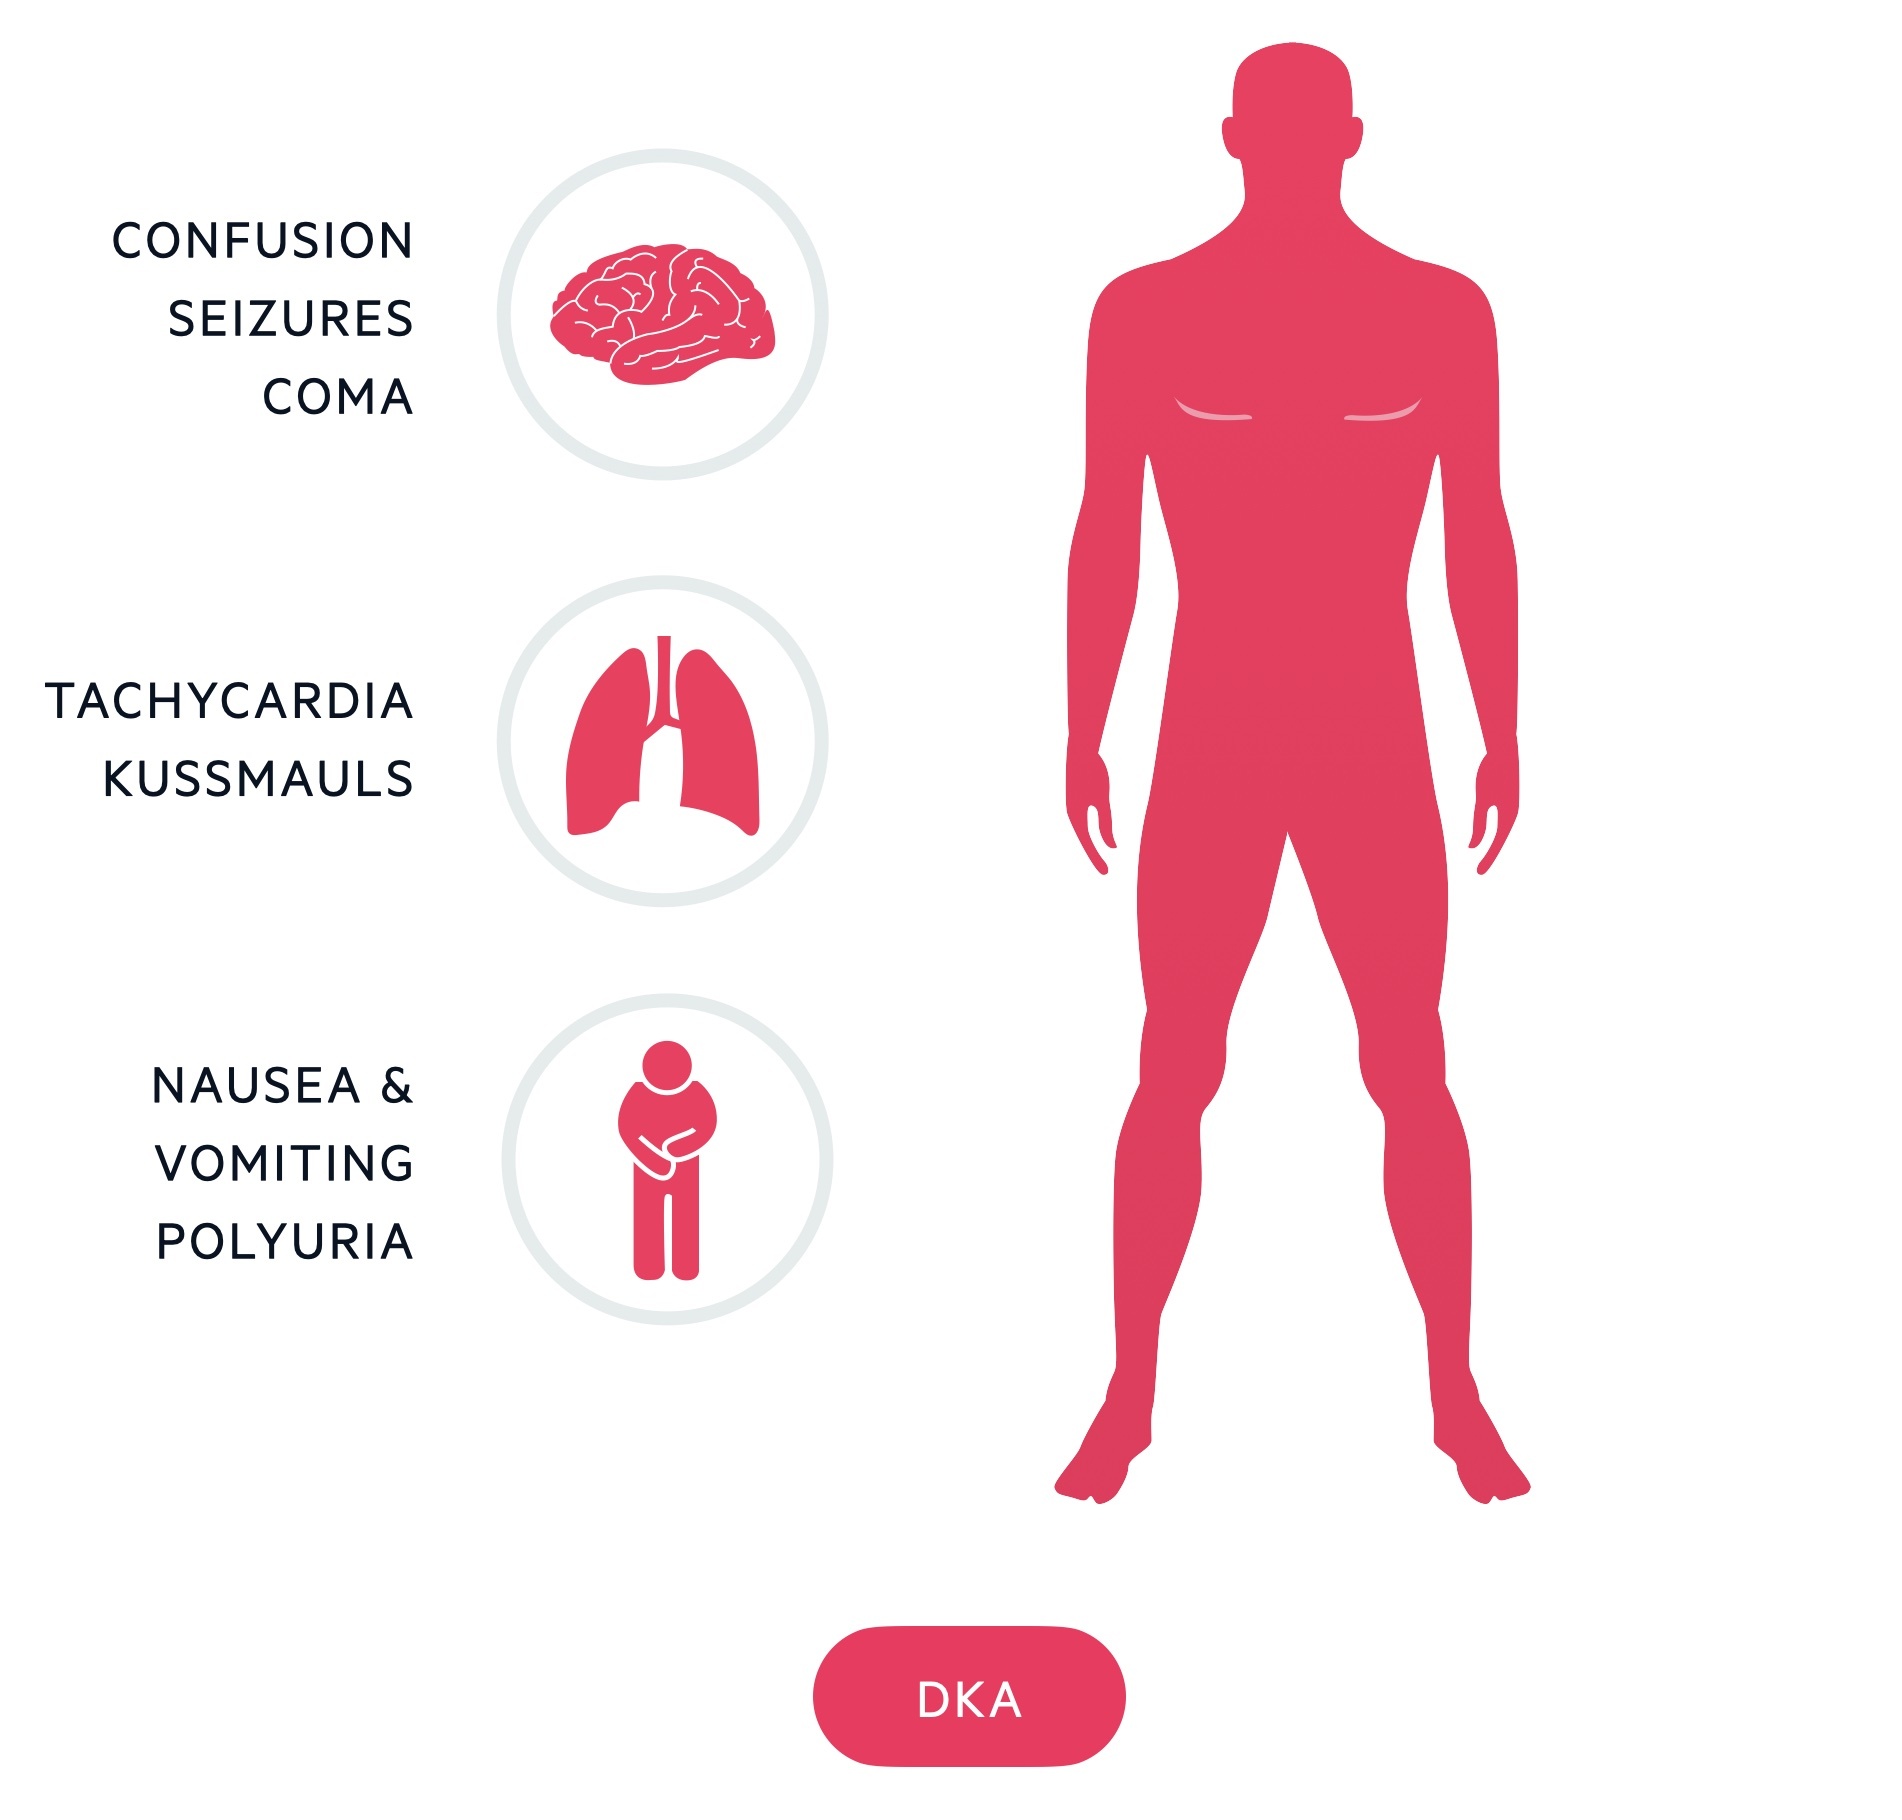 Clinical features of DKA